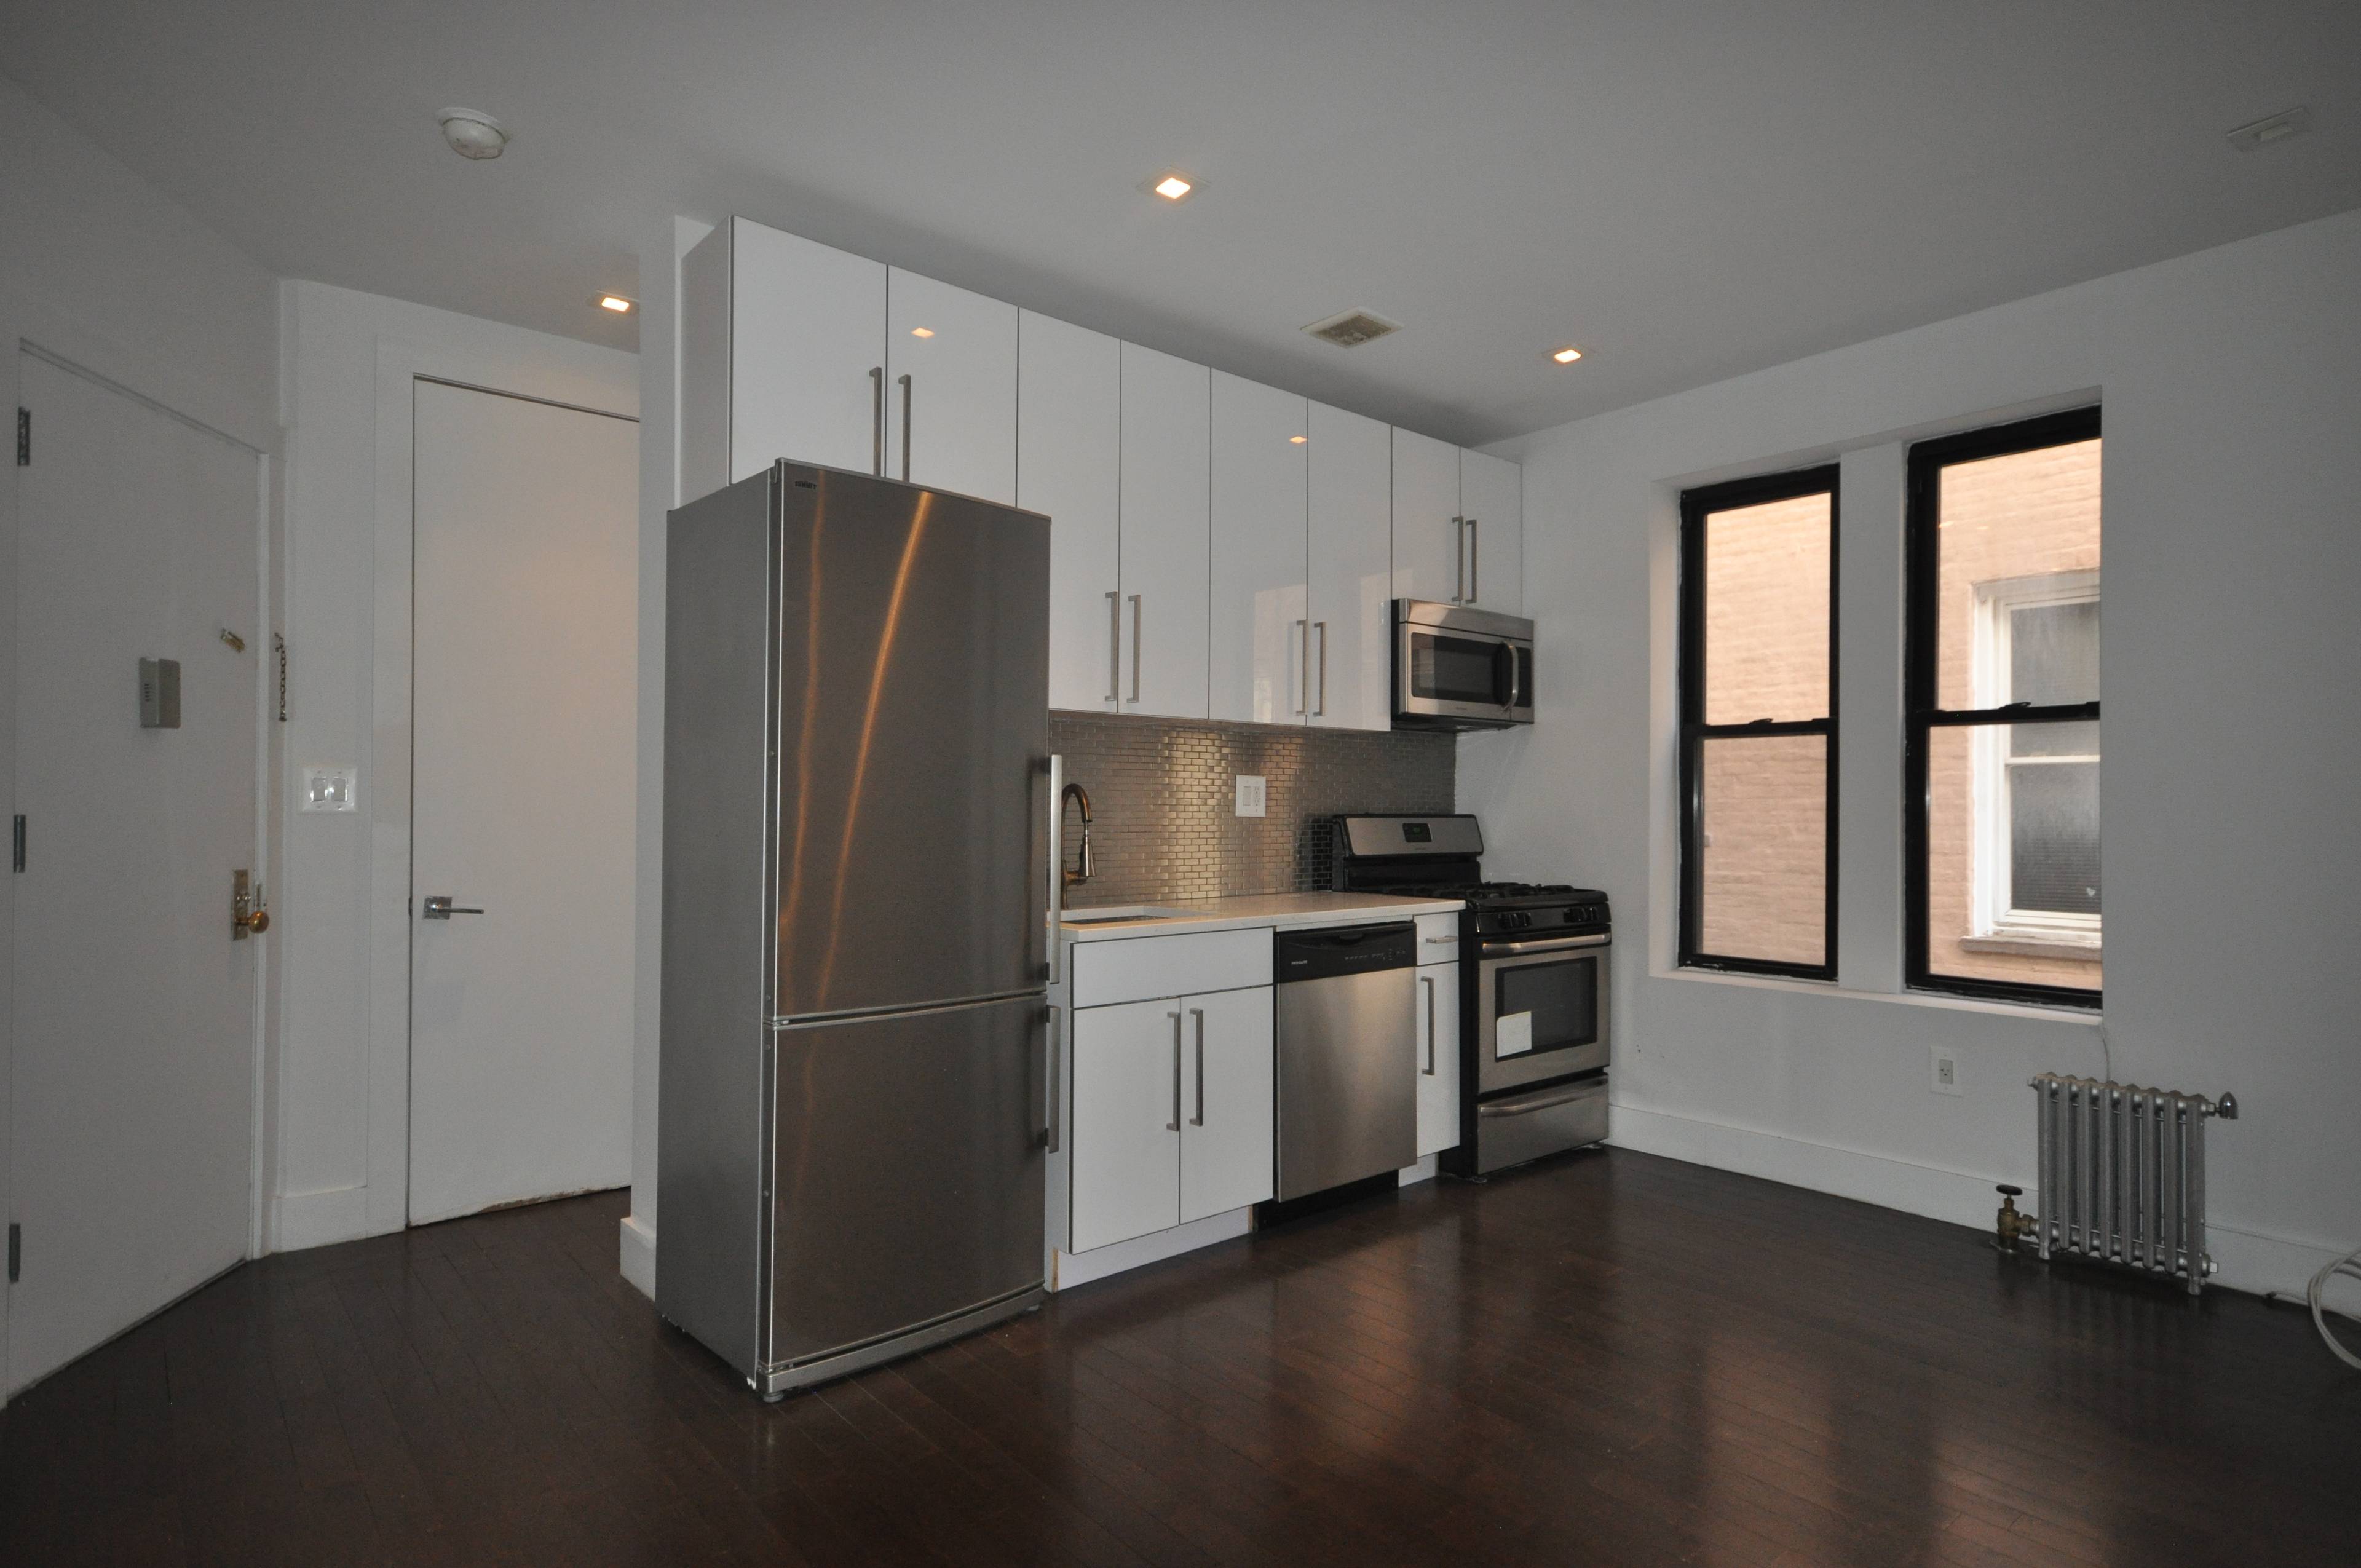 NO FEE This tastefully renovated 2 bedroom apartment in Bushwick has finishes that go above and beyond what most renovated apartments look like.